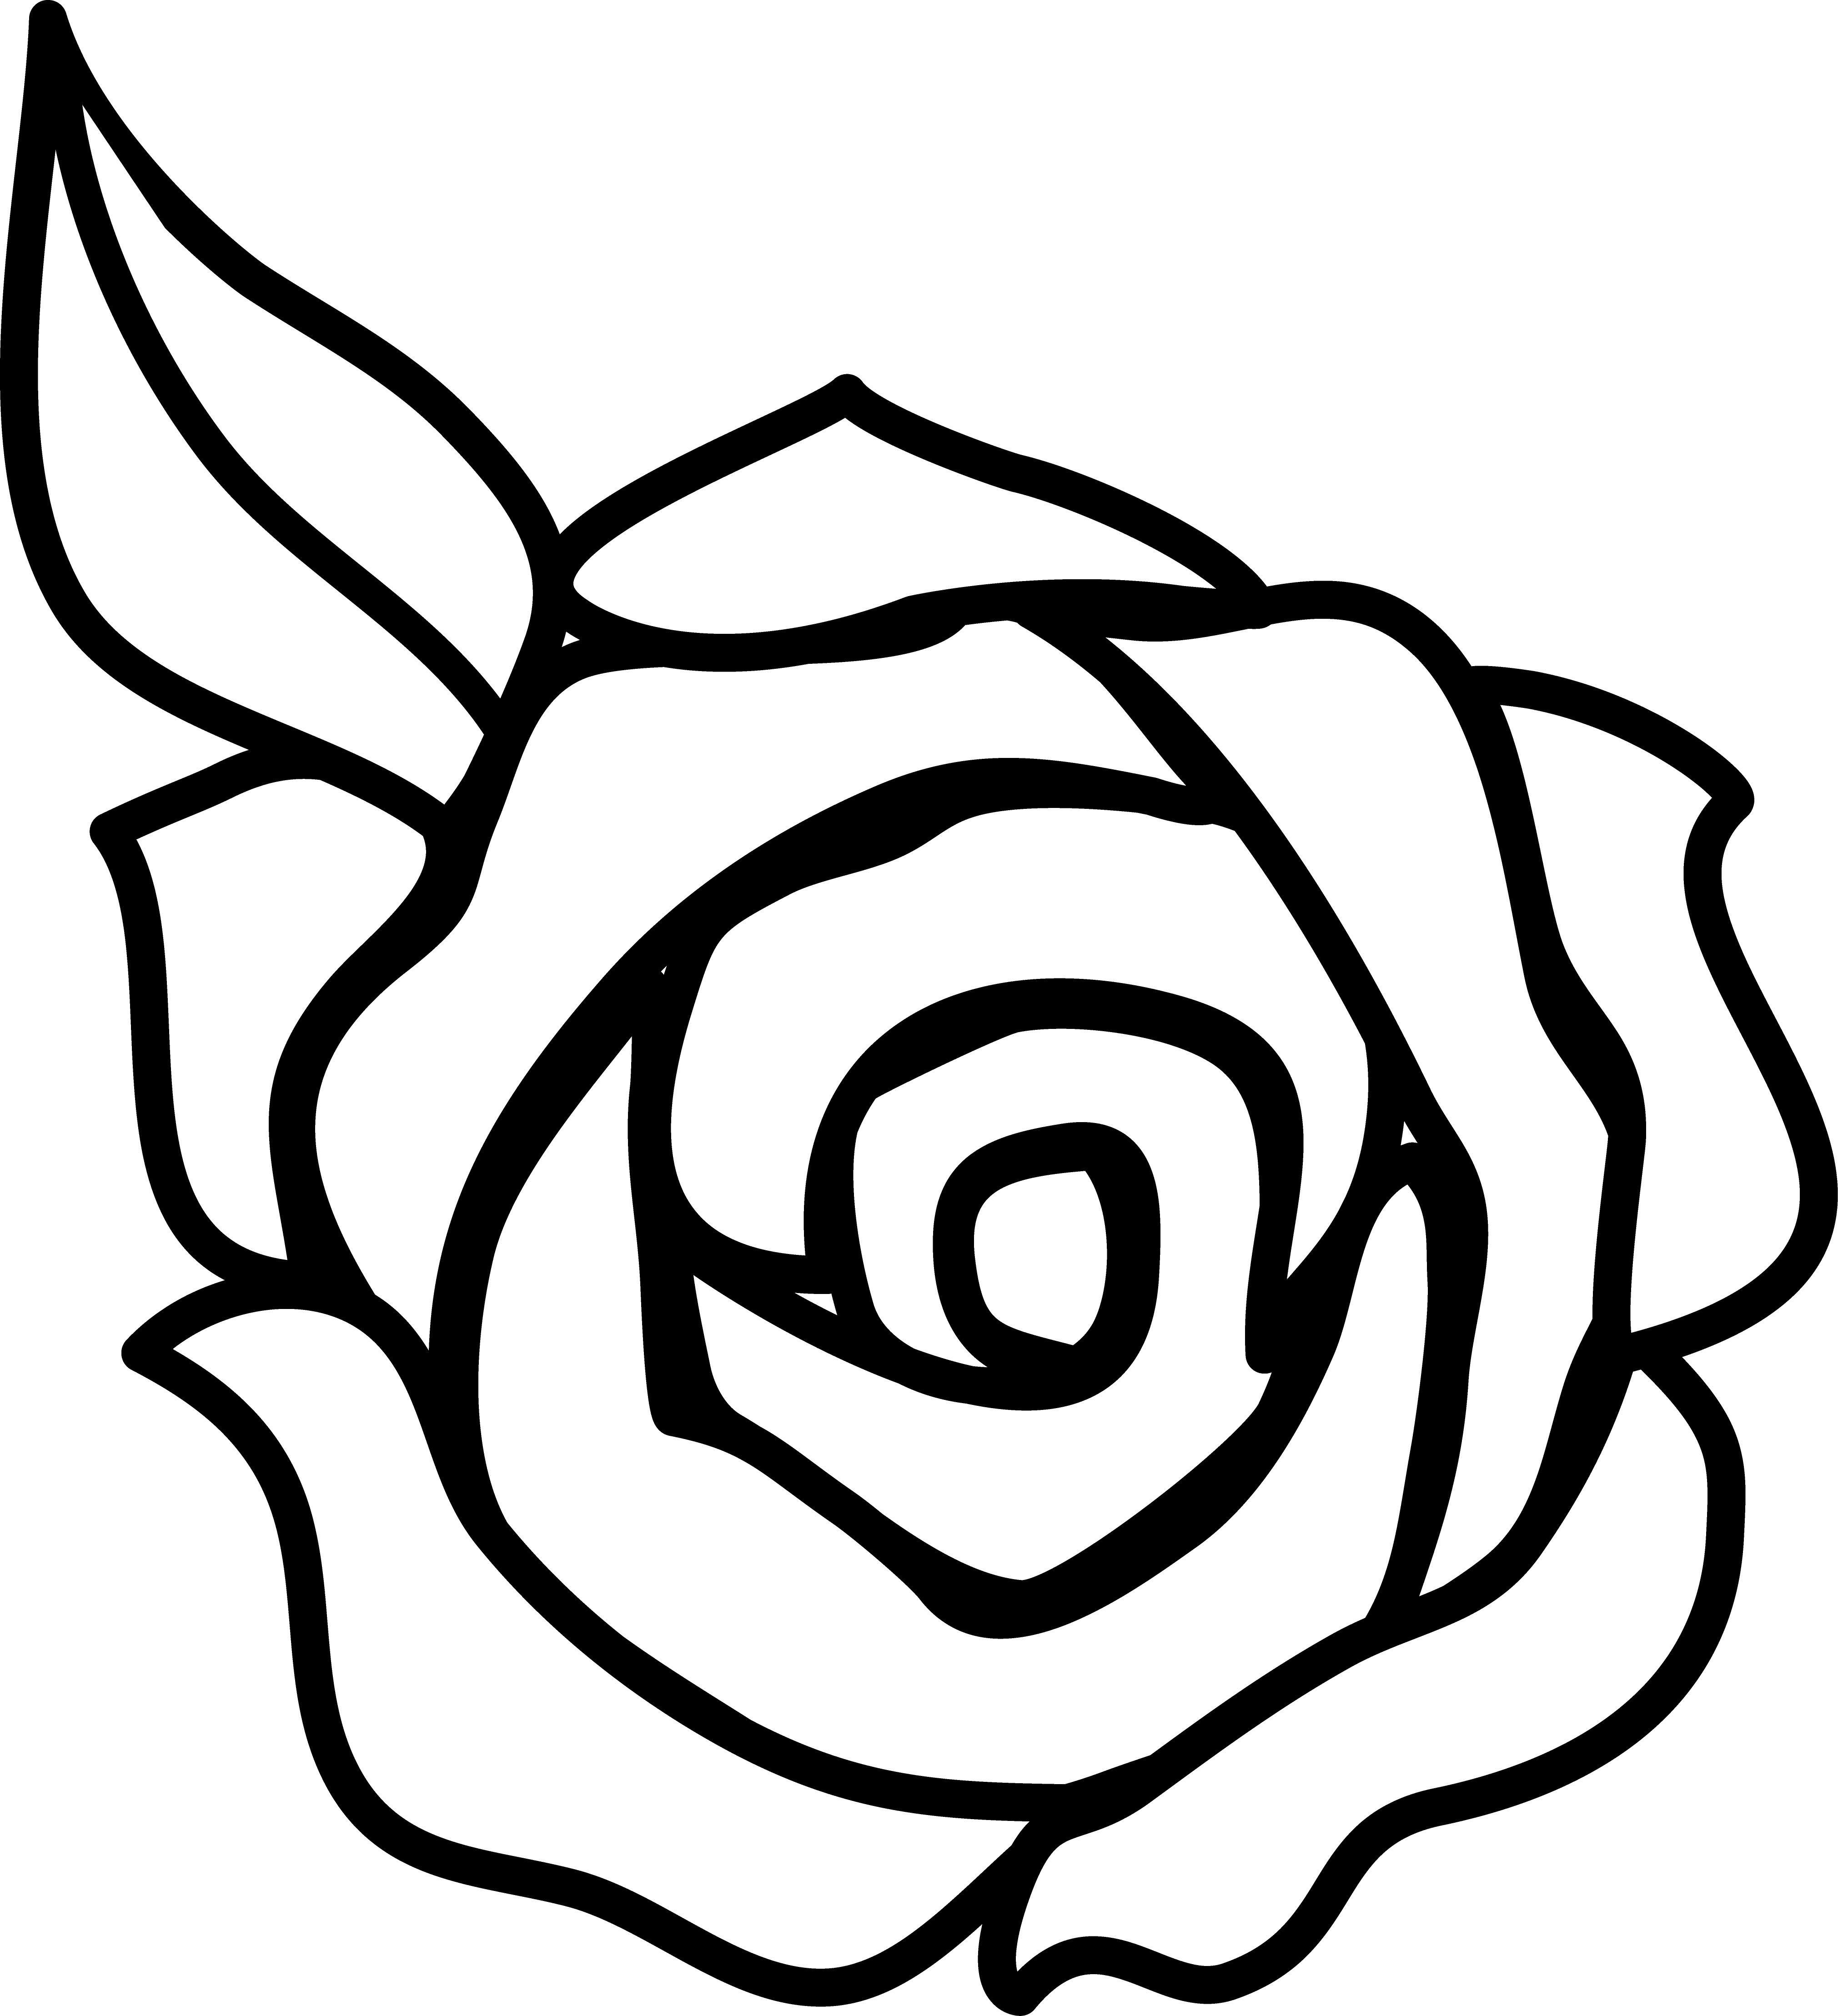 Rose clip art black and white free clipart images 4